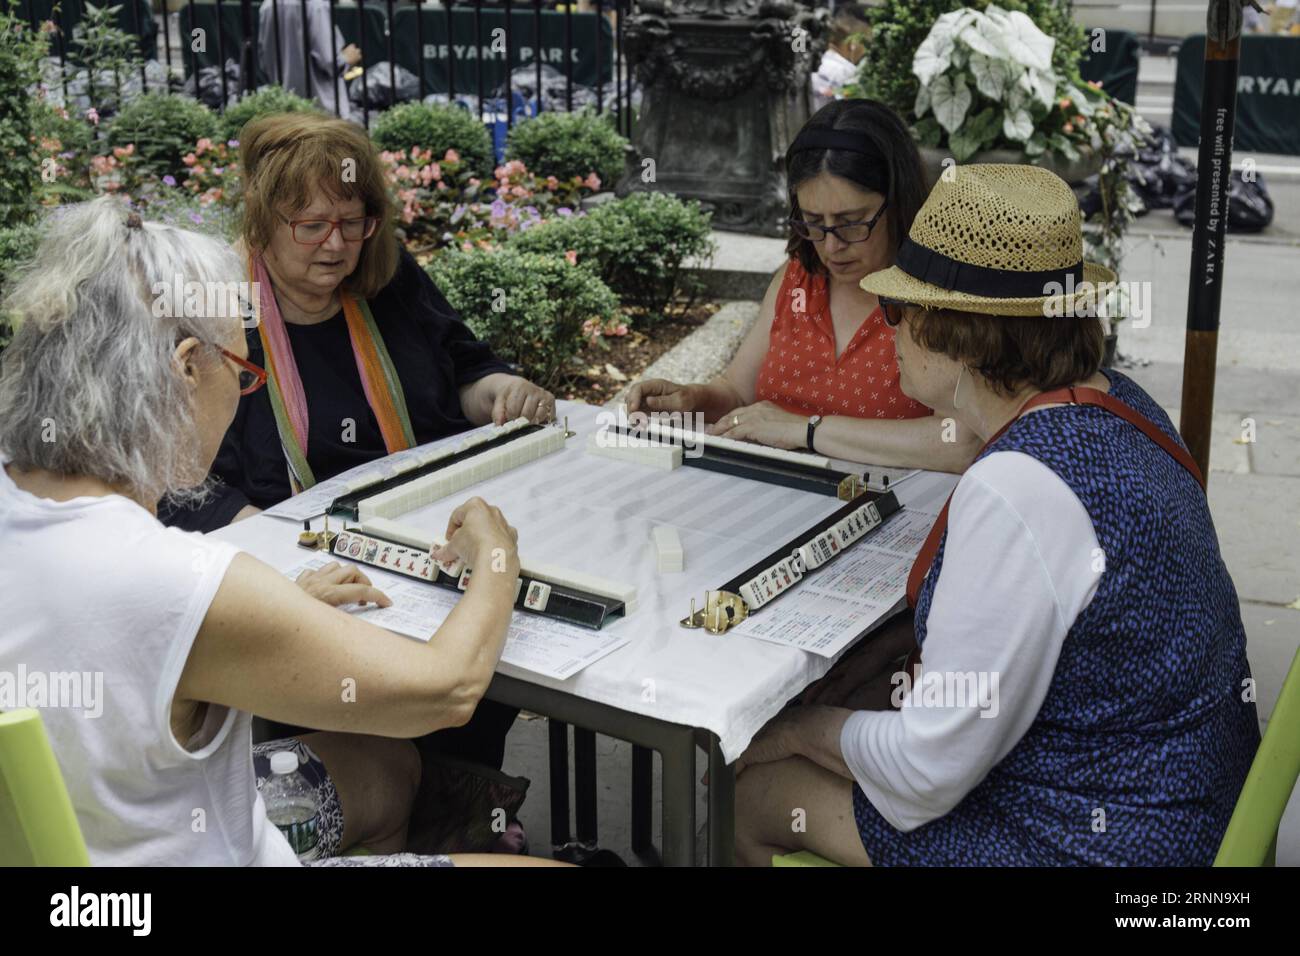 (170703) -- NEW YORK, July 3, 2017 -- Hobbyists play Mah Jongg during the Mah Jongg Marathon event at Bryant Park in New York City, the United States, on July 3, 2017. According to event organizer Linda Fisher, the event is organized to provide a place for Mah Jongg hobbyists to communicate with each other and promote the game to more people. Mah Jongg, originated from China, was introduced to the United States in the 1920s. ) U.S.-NEW YORK-MAH JONGG MARATHON XuxKeshuang PUBLICATIONxNOTxINxCHN   New York July 3 2017 hobbyists Play Mah Jongg during The Mah Jongg Marathon Event AT Bryant Park in Stock Photo